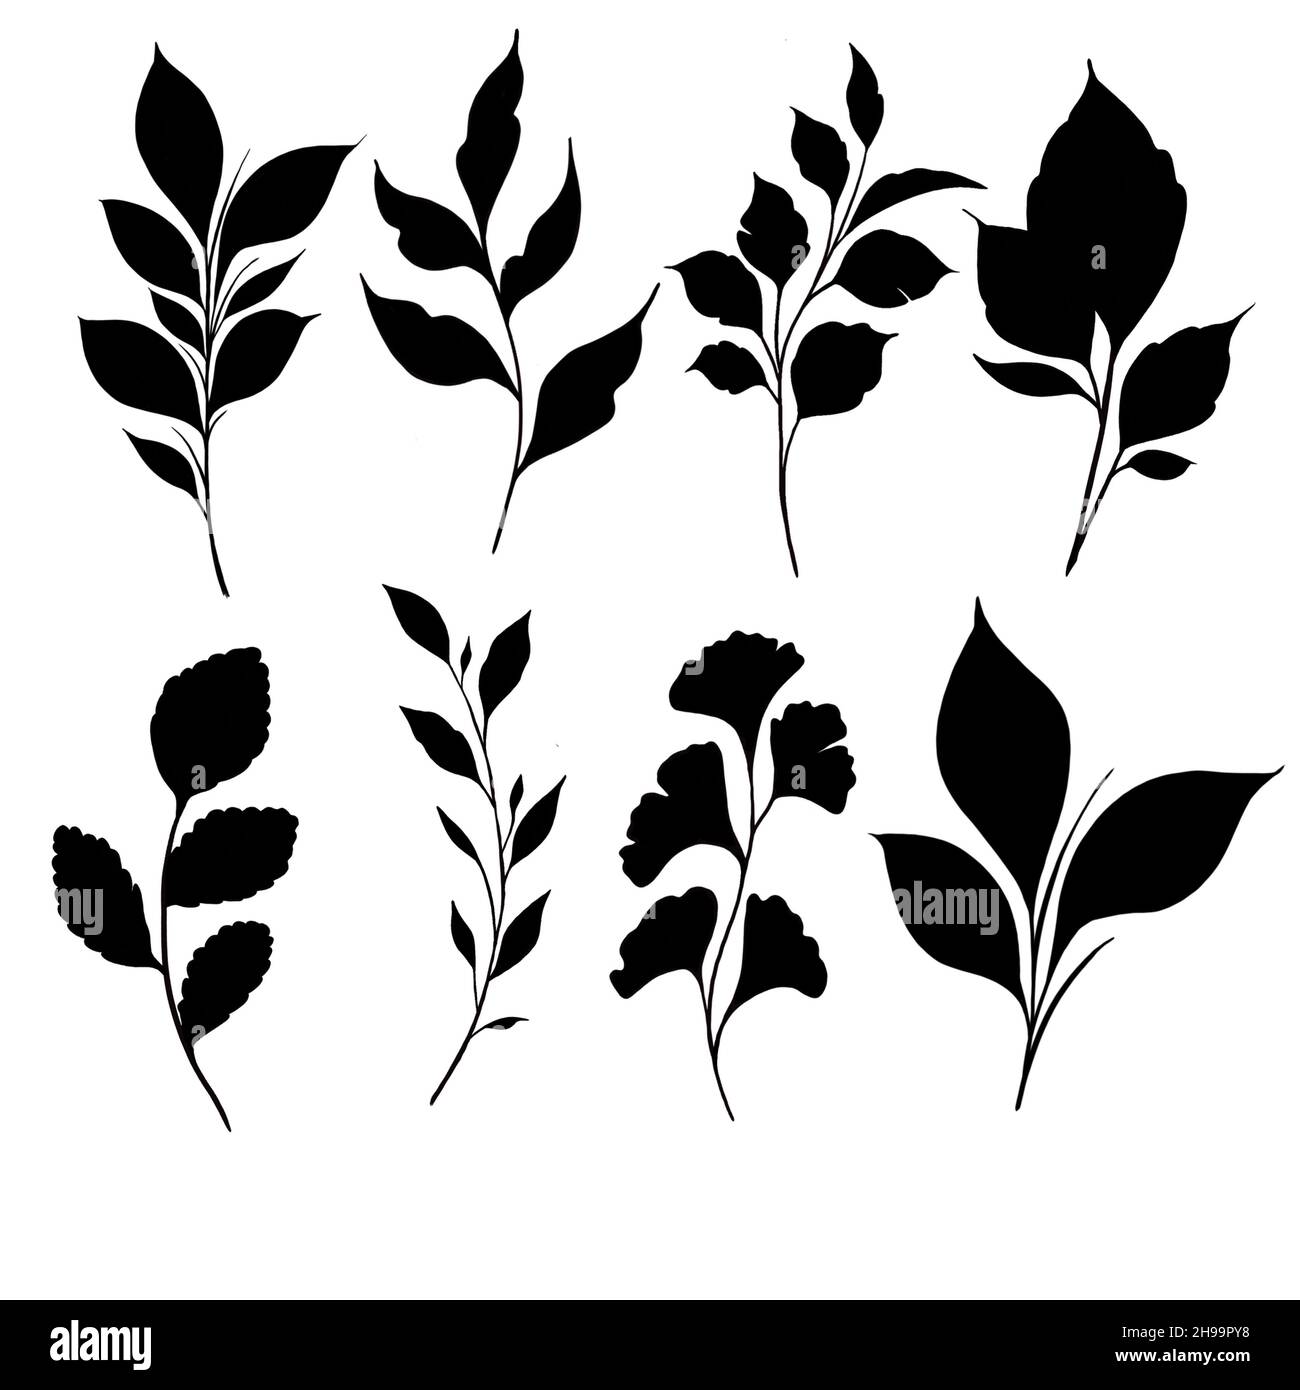 Peony flowers and leaves, tattoo compositions. black linear illustration  isolated on a white background. flowers arrangements | CanStock